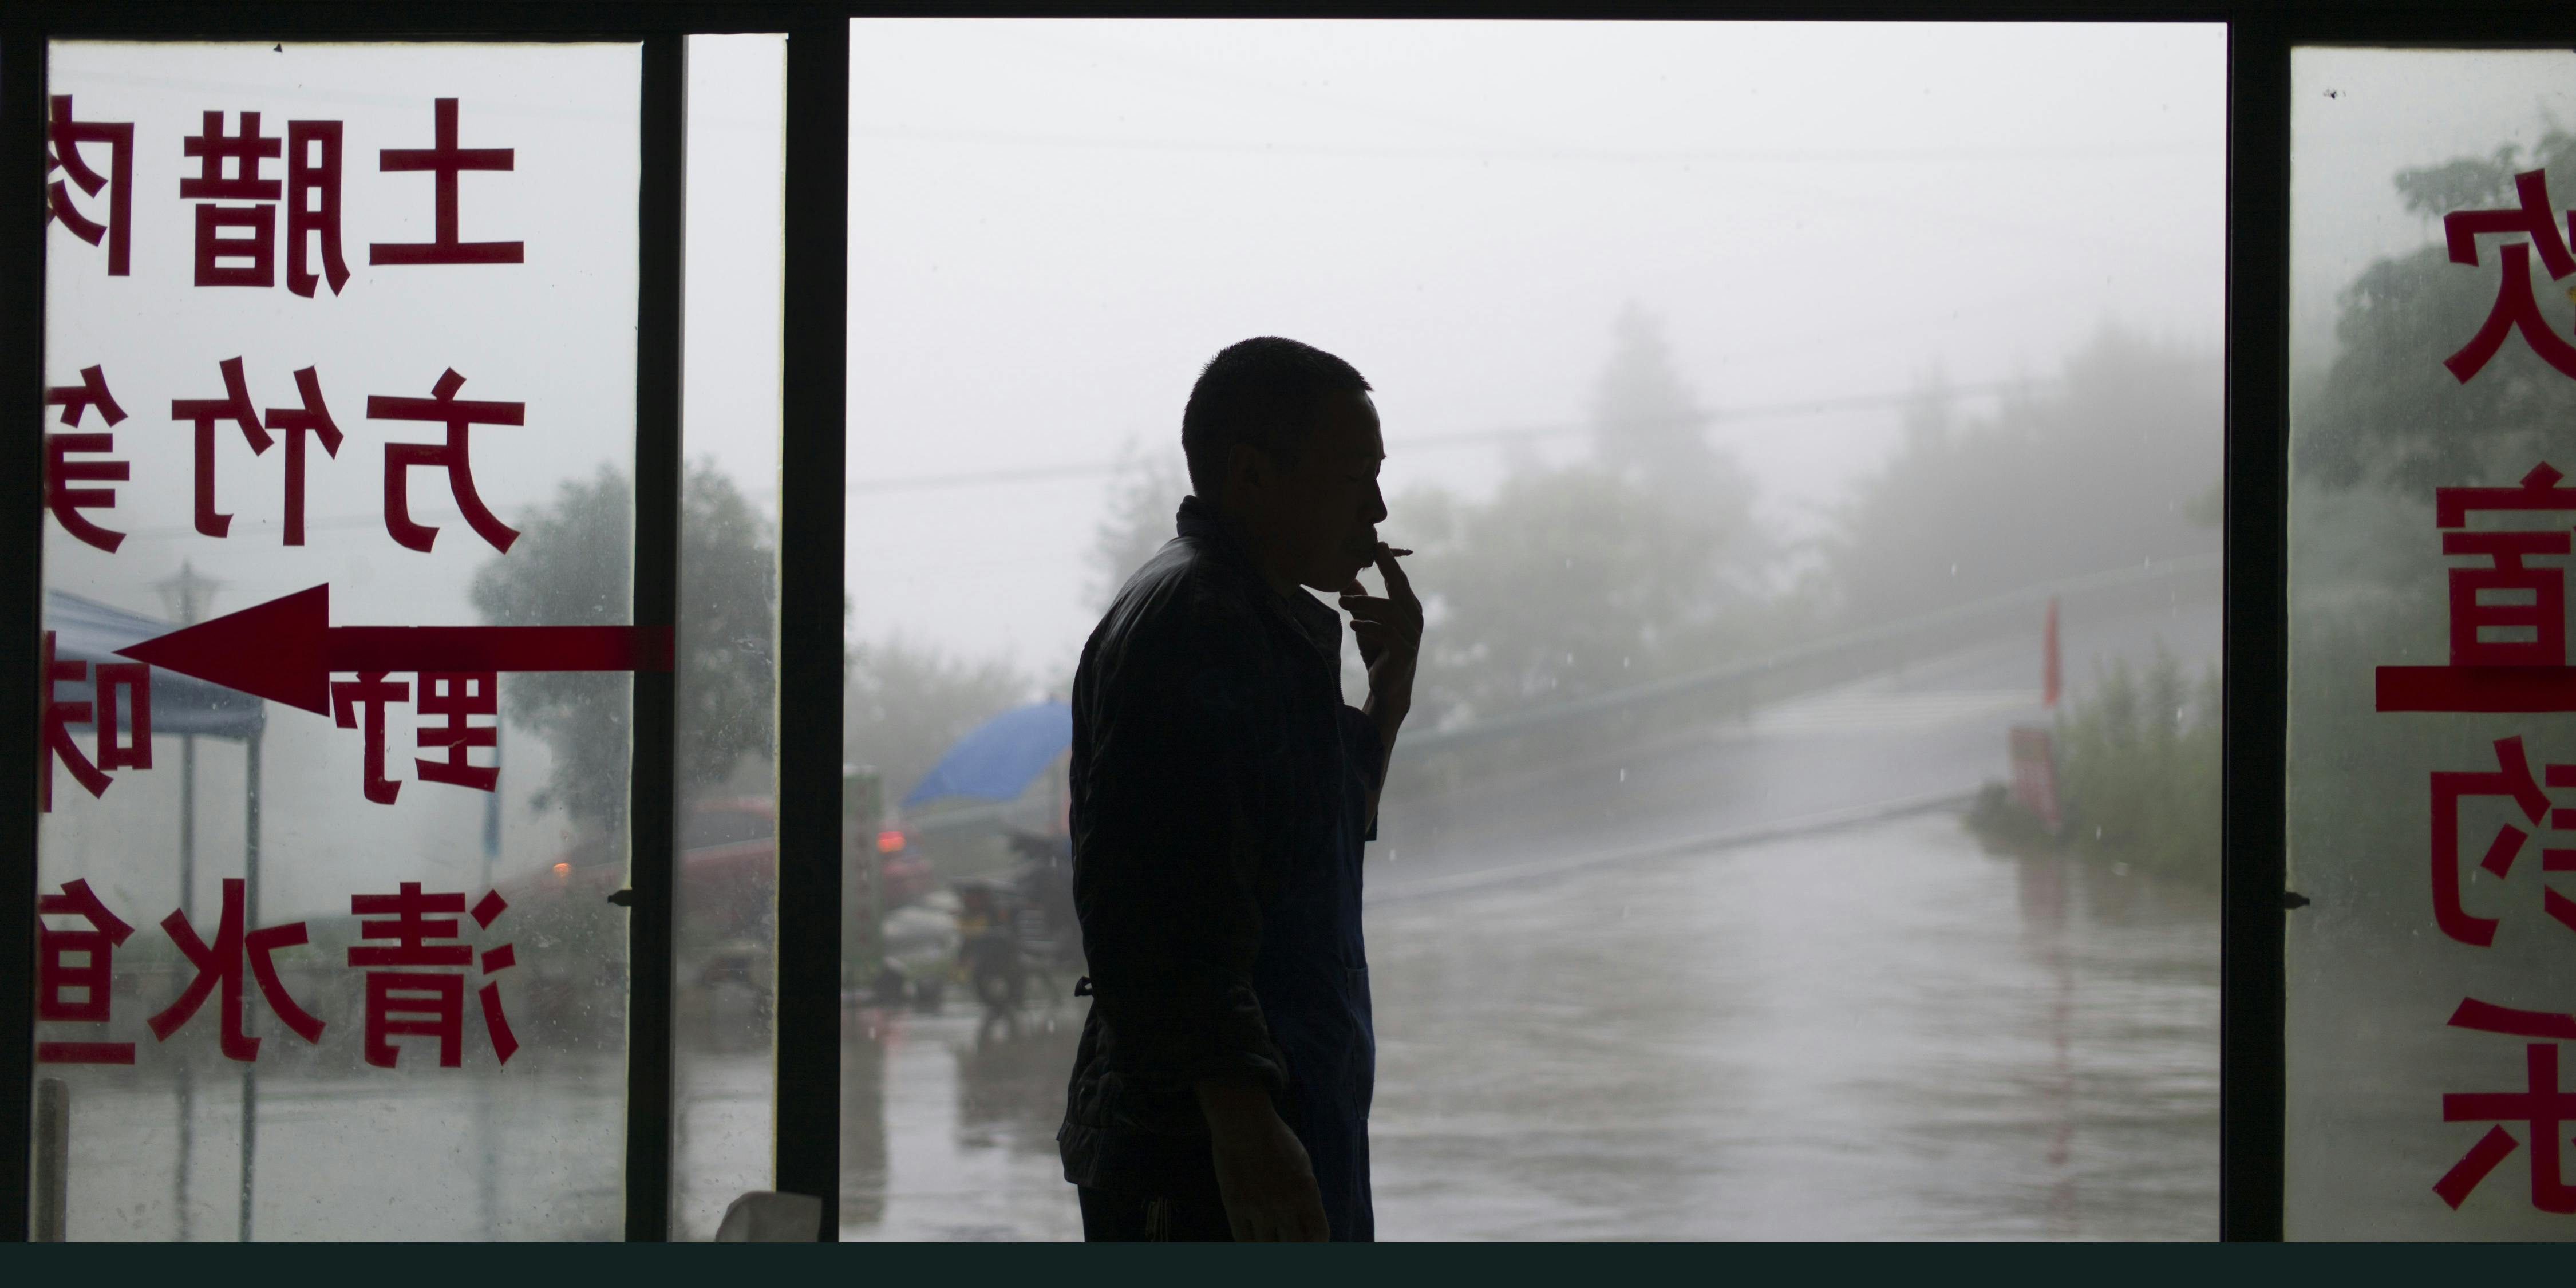 A man smokes on the outskirts of Chongqing, southwest China, on June 1, 2017. (Photo by Fred Dufour/AFP via Getty Images)